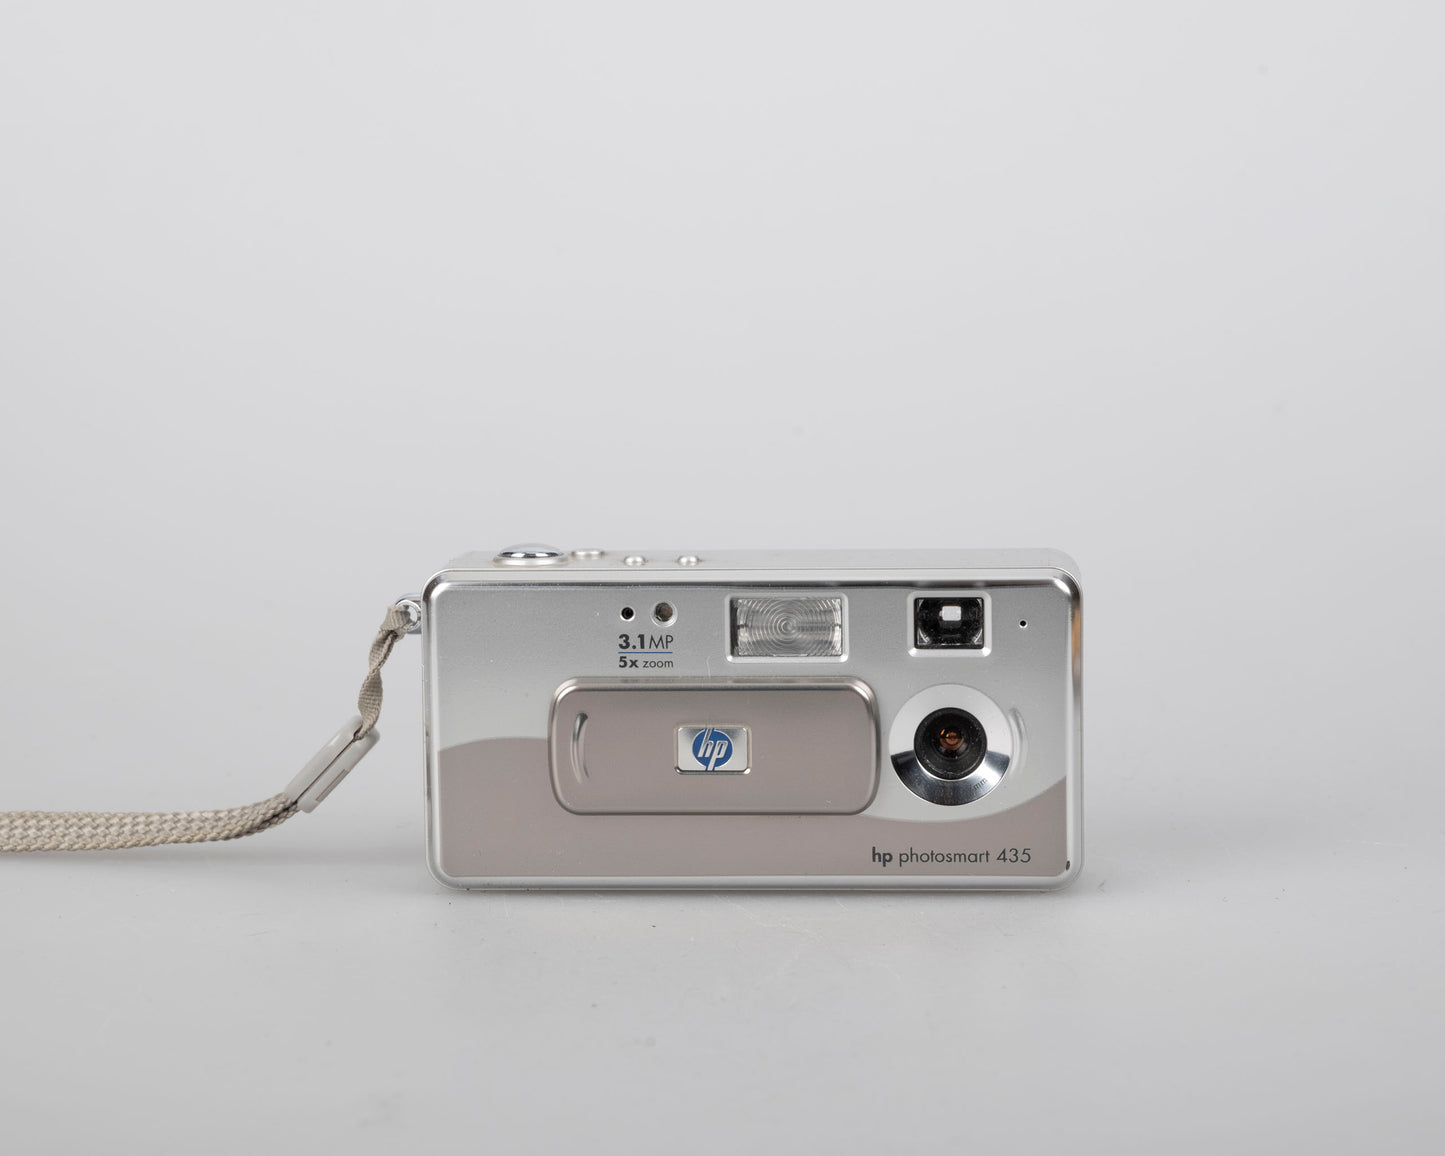 HP Photosmart 435 3.1 MP CCD sensor digicam w/original box and cable (uses AA batteries + SD cards)